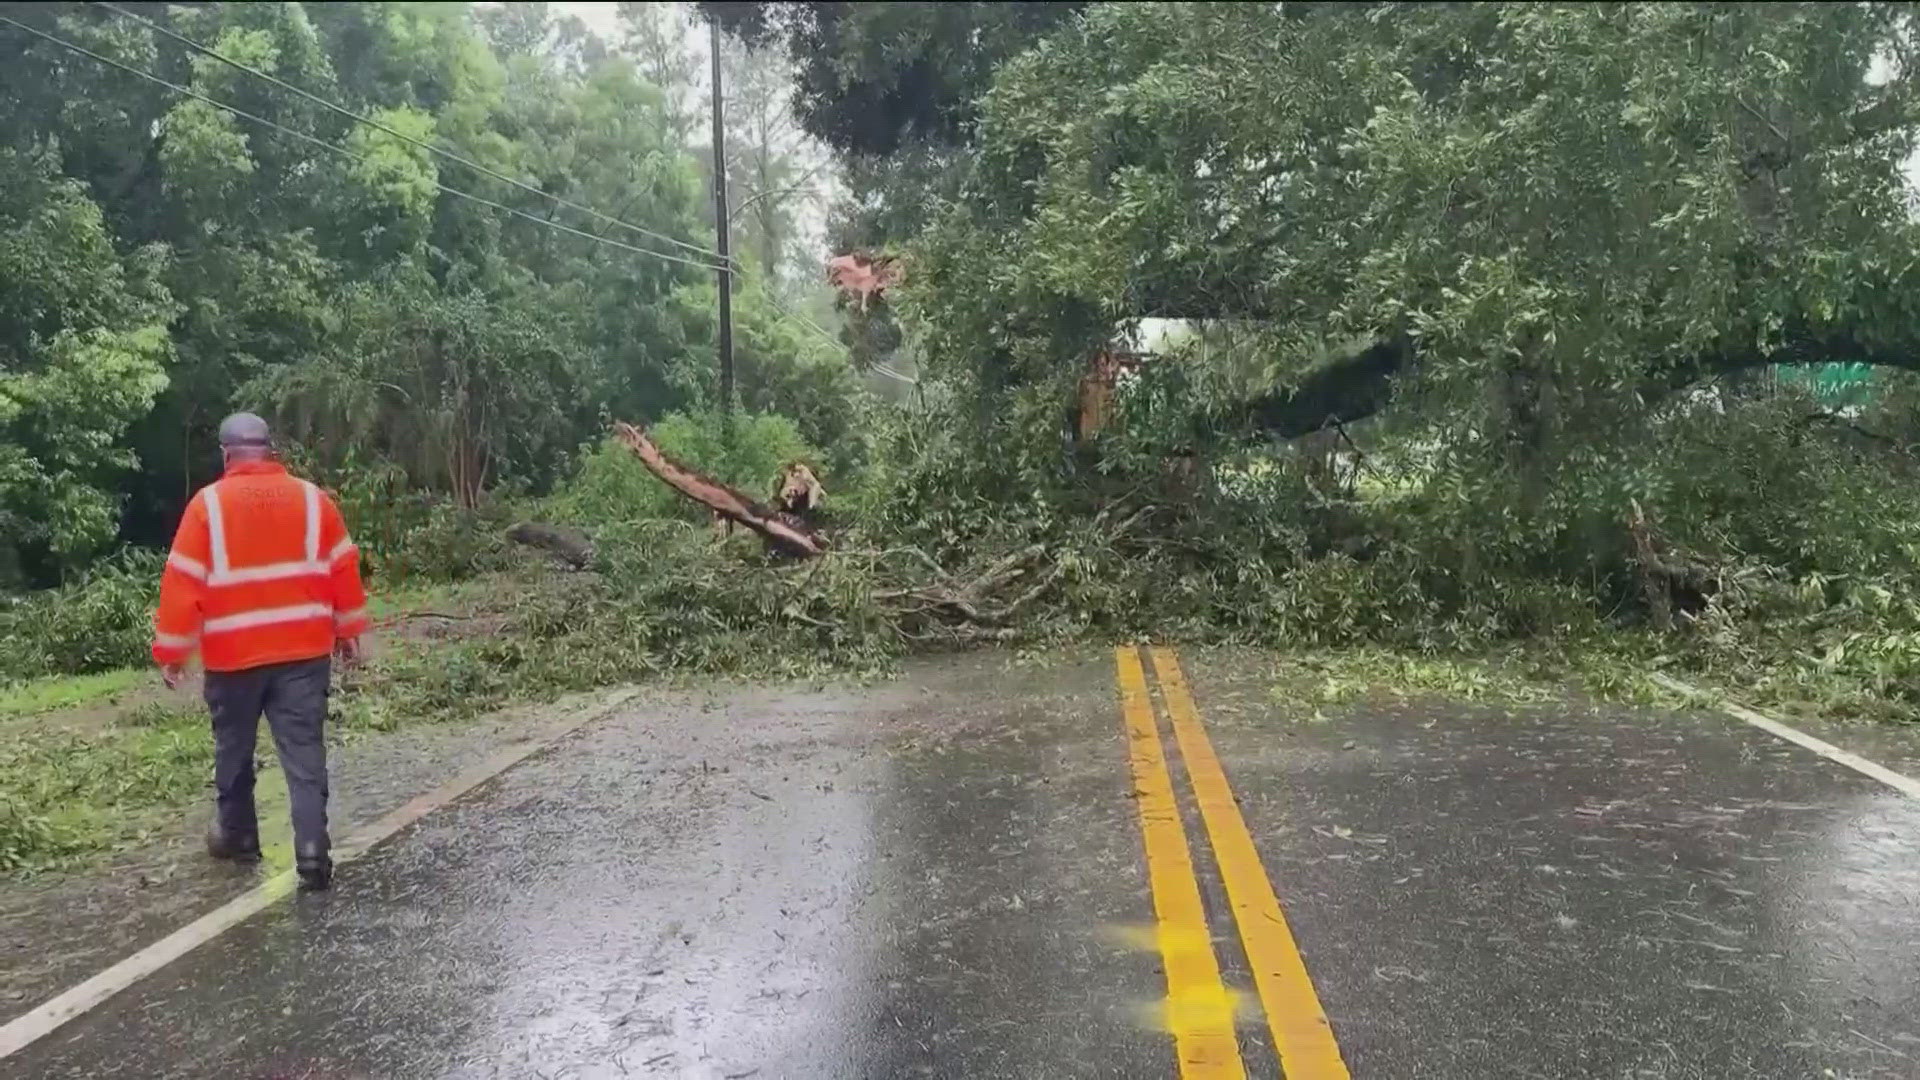 The hurricane claimed the life of a 13-year-old boy who was killed when a tree fell on his home.